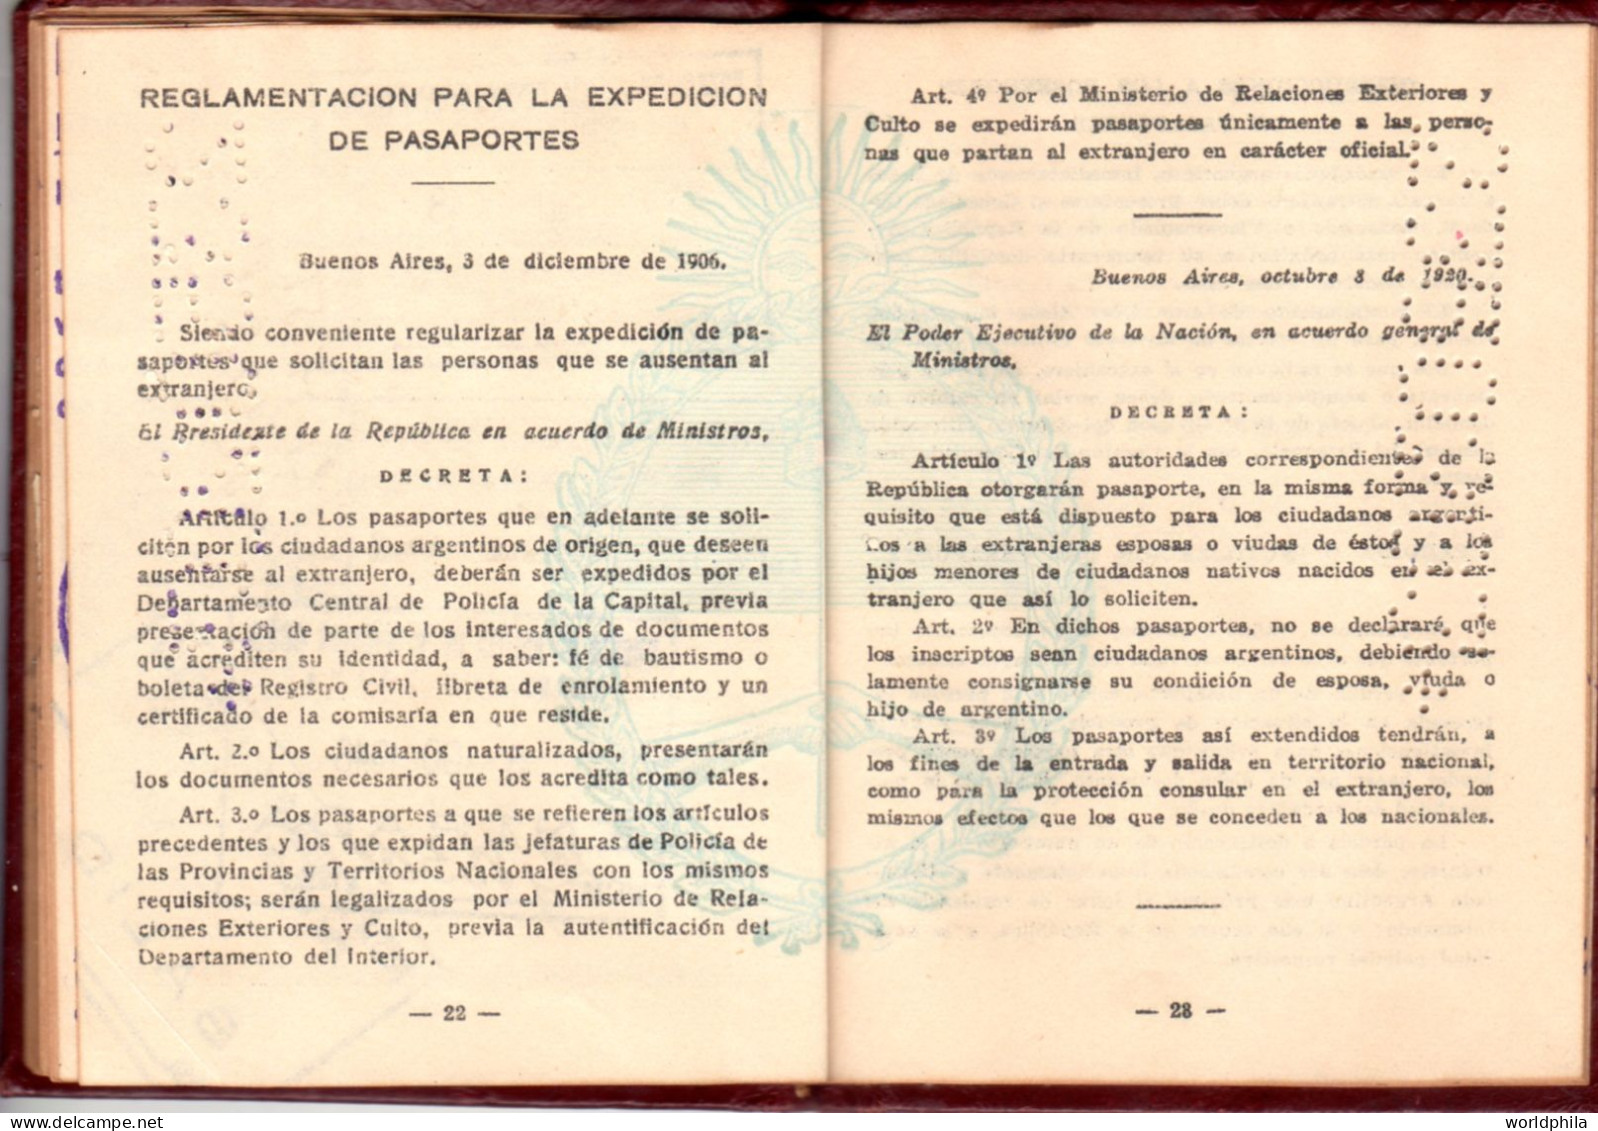 Argentina 1948 much travelled document, Europe, many revenue stamps. signed Passport History document